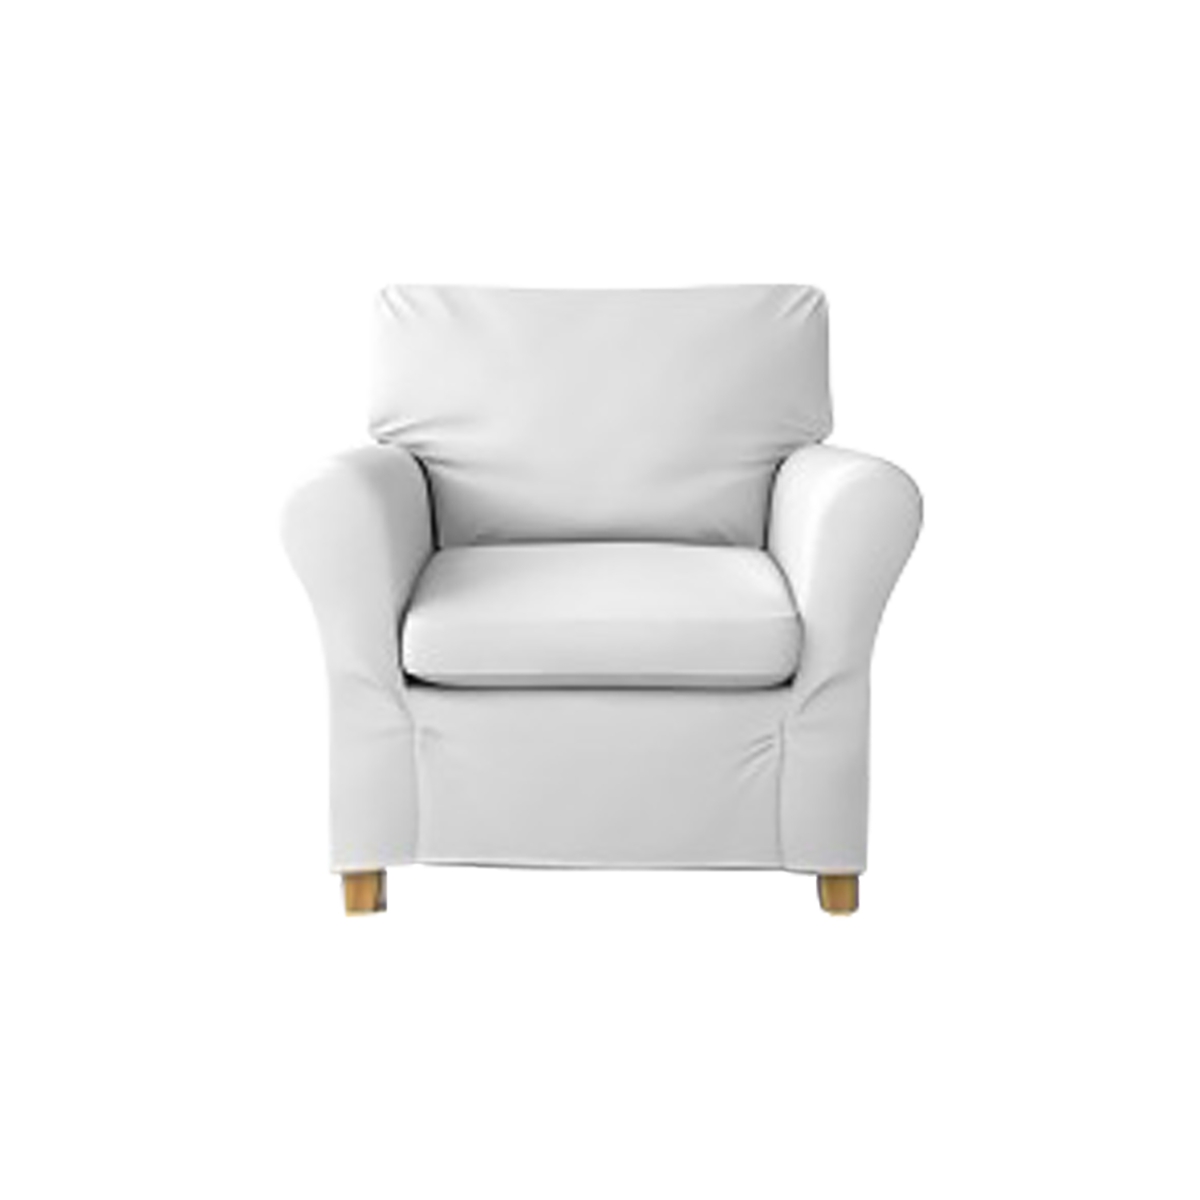 https://149802147.v2.pressablecdn.com/wp-content/uploads/2021/11/Ikea_Masters_of_Covers_Angby_Armchair_Cover_Cotton_White.png